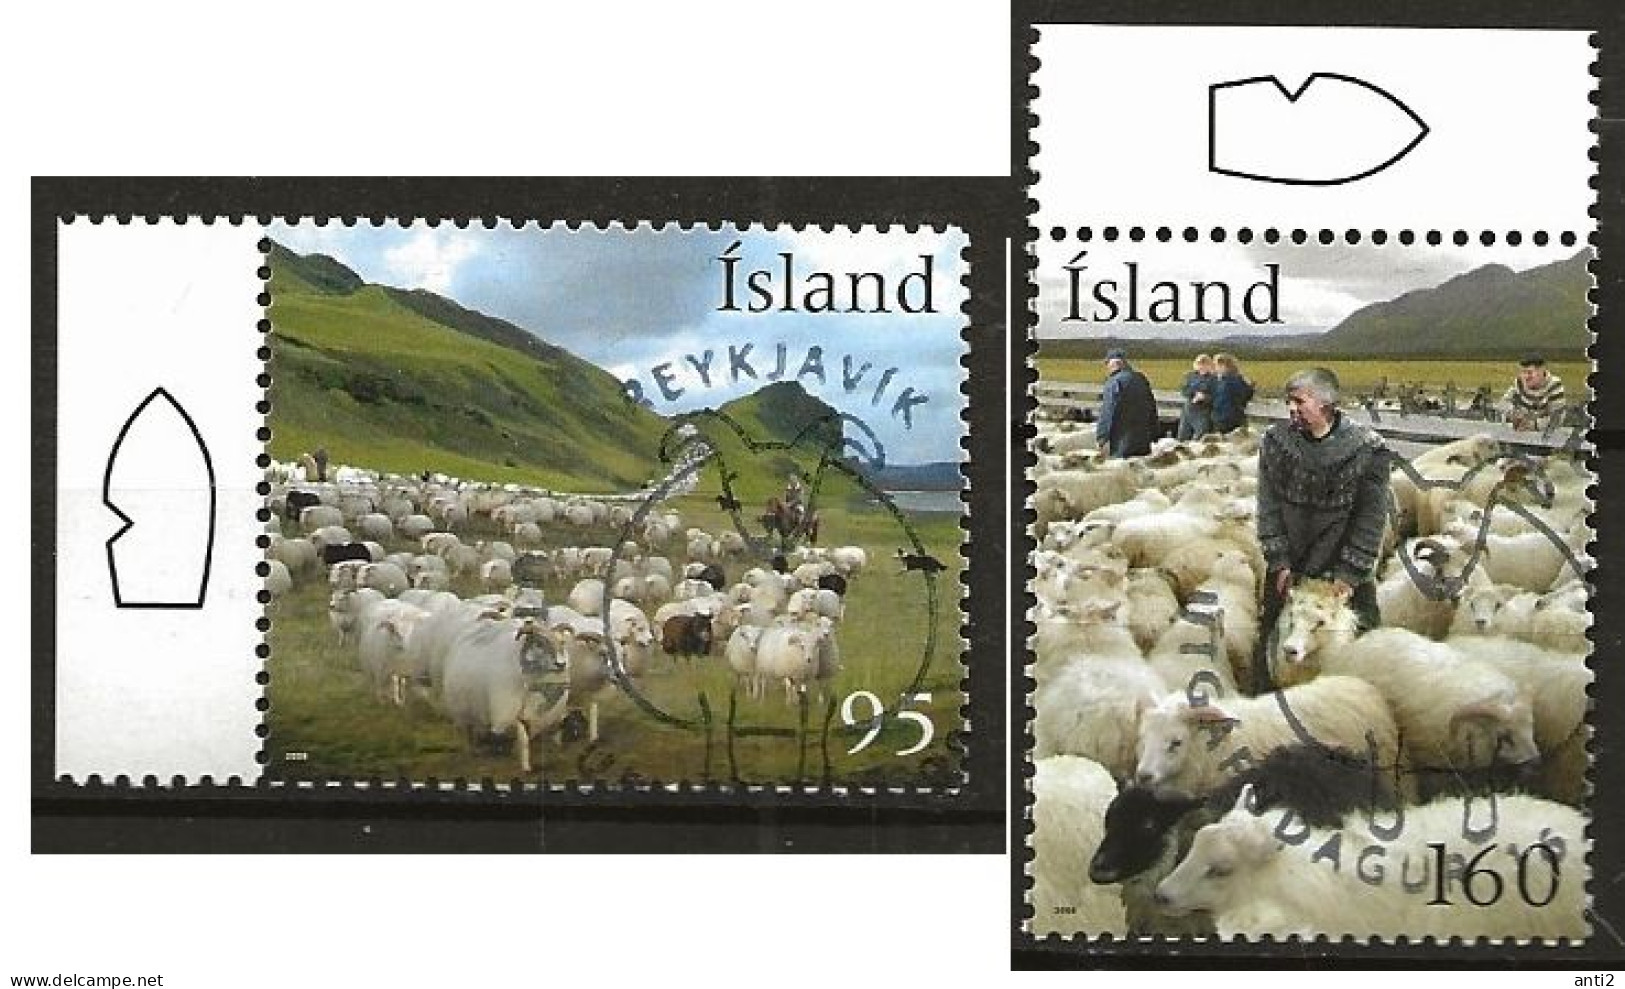 Iceland Island 2009 Driving The Sheep Home  MI 1247-1248 Cancelled(o) - Used Stamps